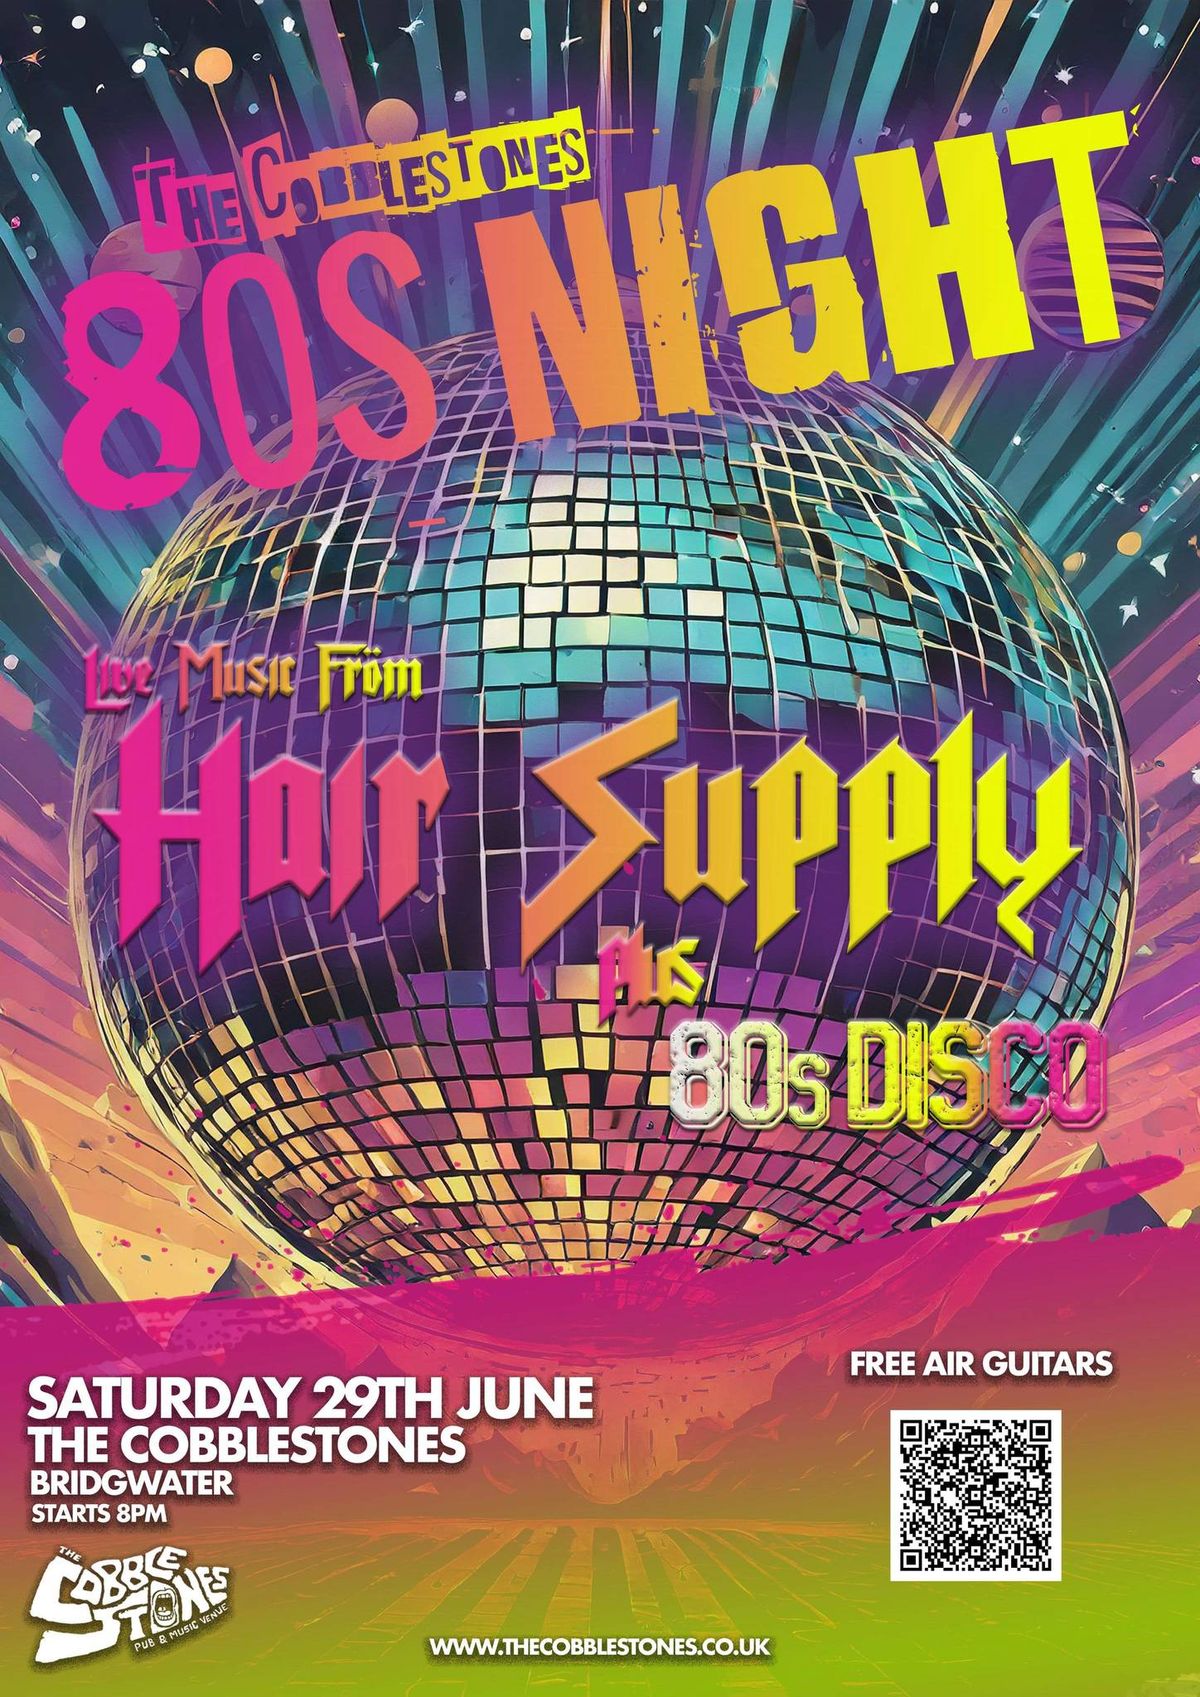 80s Night featuring Hair Supply At The Cobblestones, Bridgwater